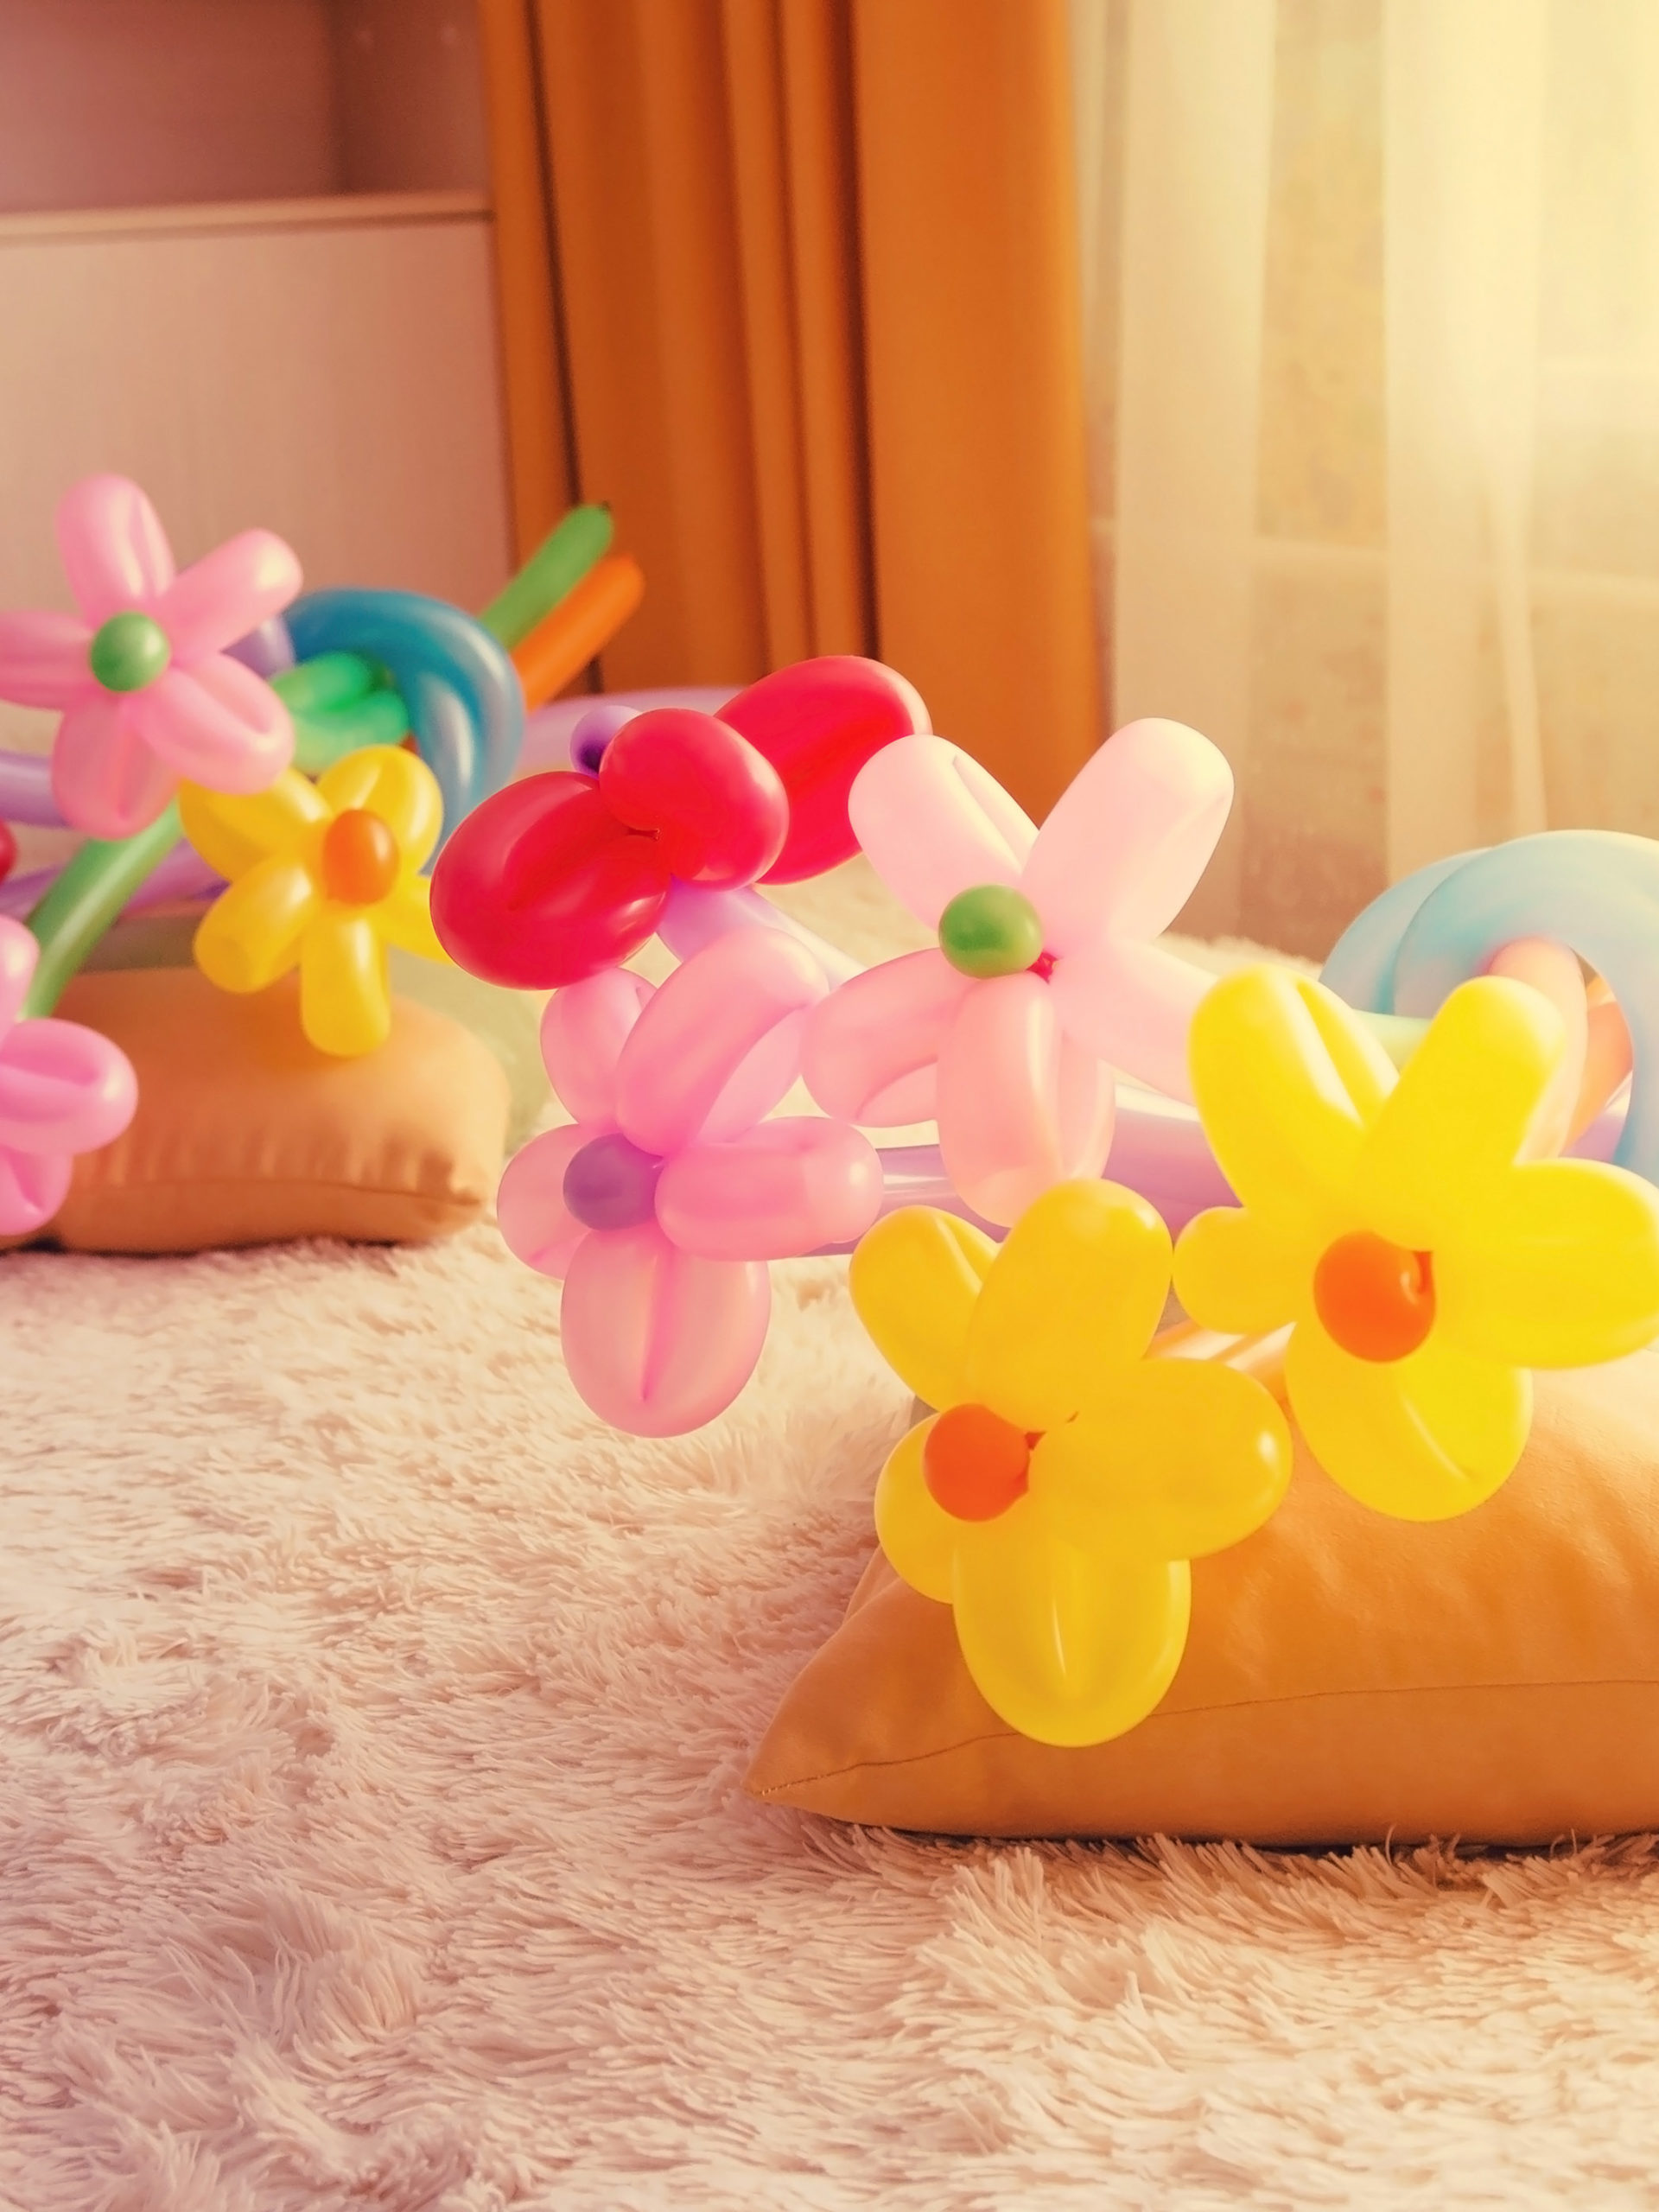 flowers made from balloons on bed in hospital